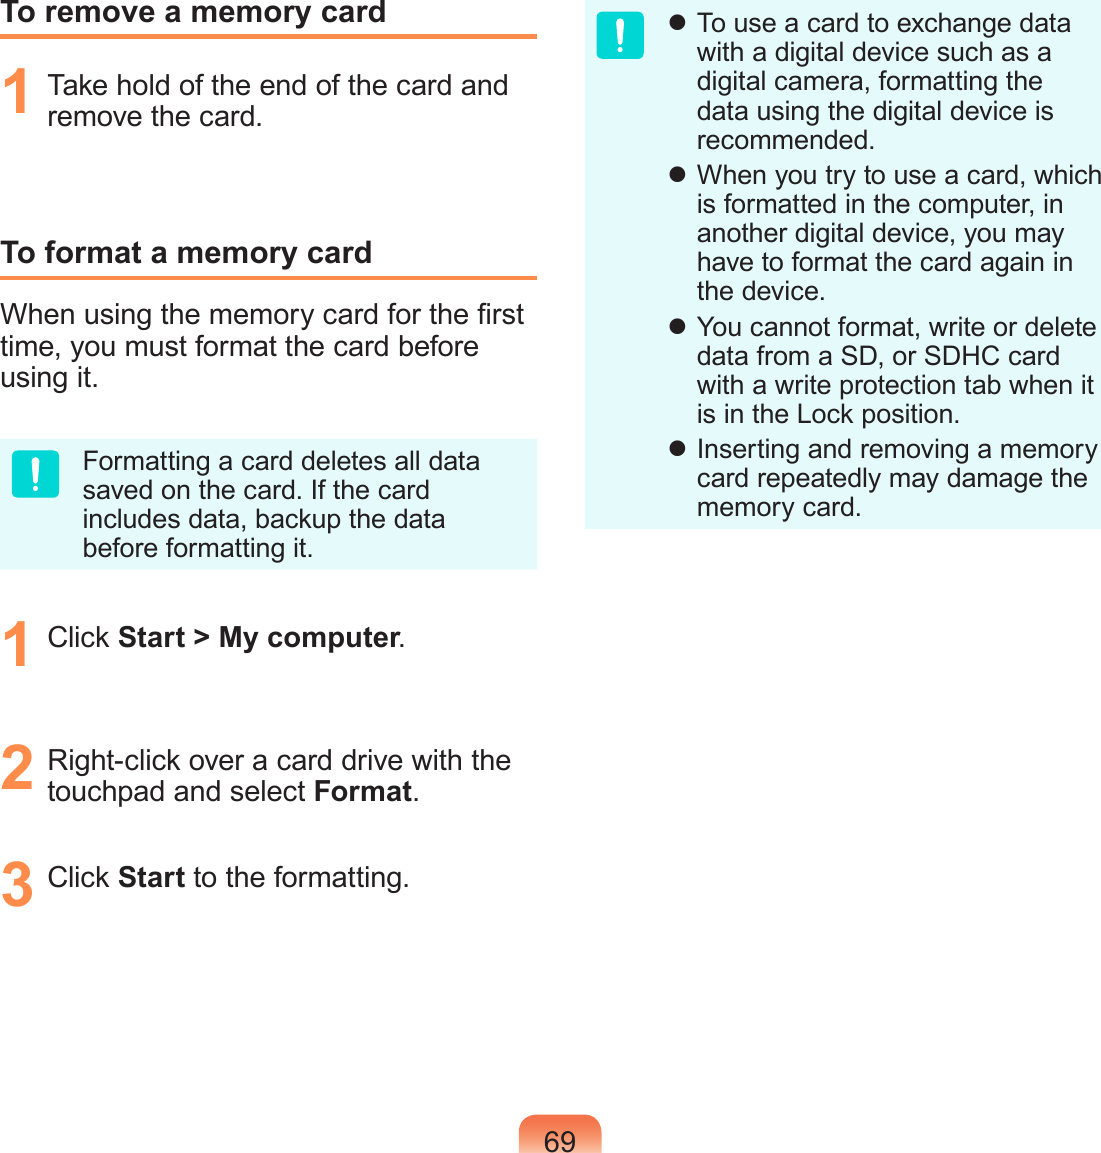 69To remove a memory card1  Take hold of the end of the card and remove the card.To format a memory cardWhen using the memory card for the rst time, you must format the card before using it.Formatting a card deletes all data saved on the card. If the card includes data, backup the data before formatting it.1  Click Start &gt; My computer.2  Right-click over a card drive with the touchpad and select Format.3  Click Start to the formatting. To use a card to exchange data with a digital device such as a digital camera, formatting the data using the digital device is recommended. When you try to use a card, which is formatted in the computer, in another digital device, you may have to format the card again in the device. You cannot format, write or delete data from a SD, or SDHC card with a write protection tab when it is in the Lock position. Inserting and removing a memory card repeatedly may damage the memory card.